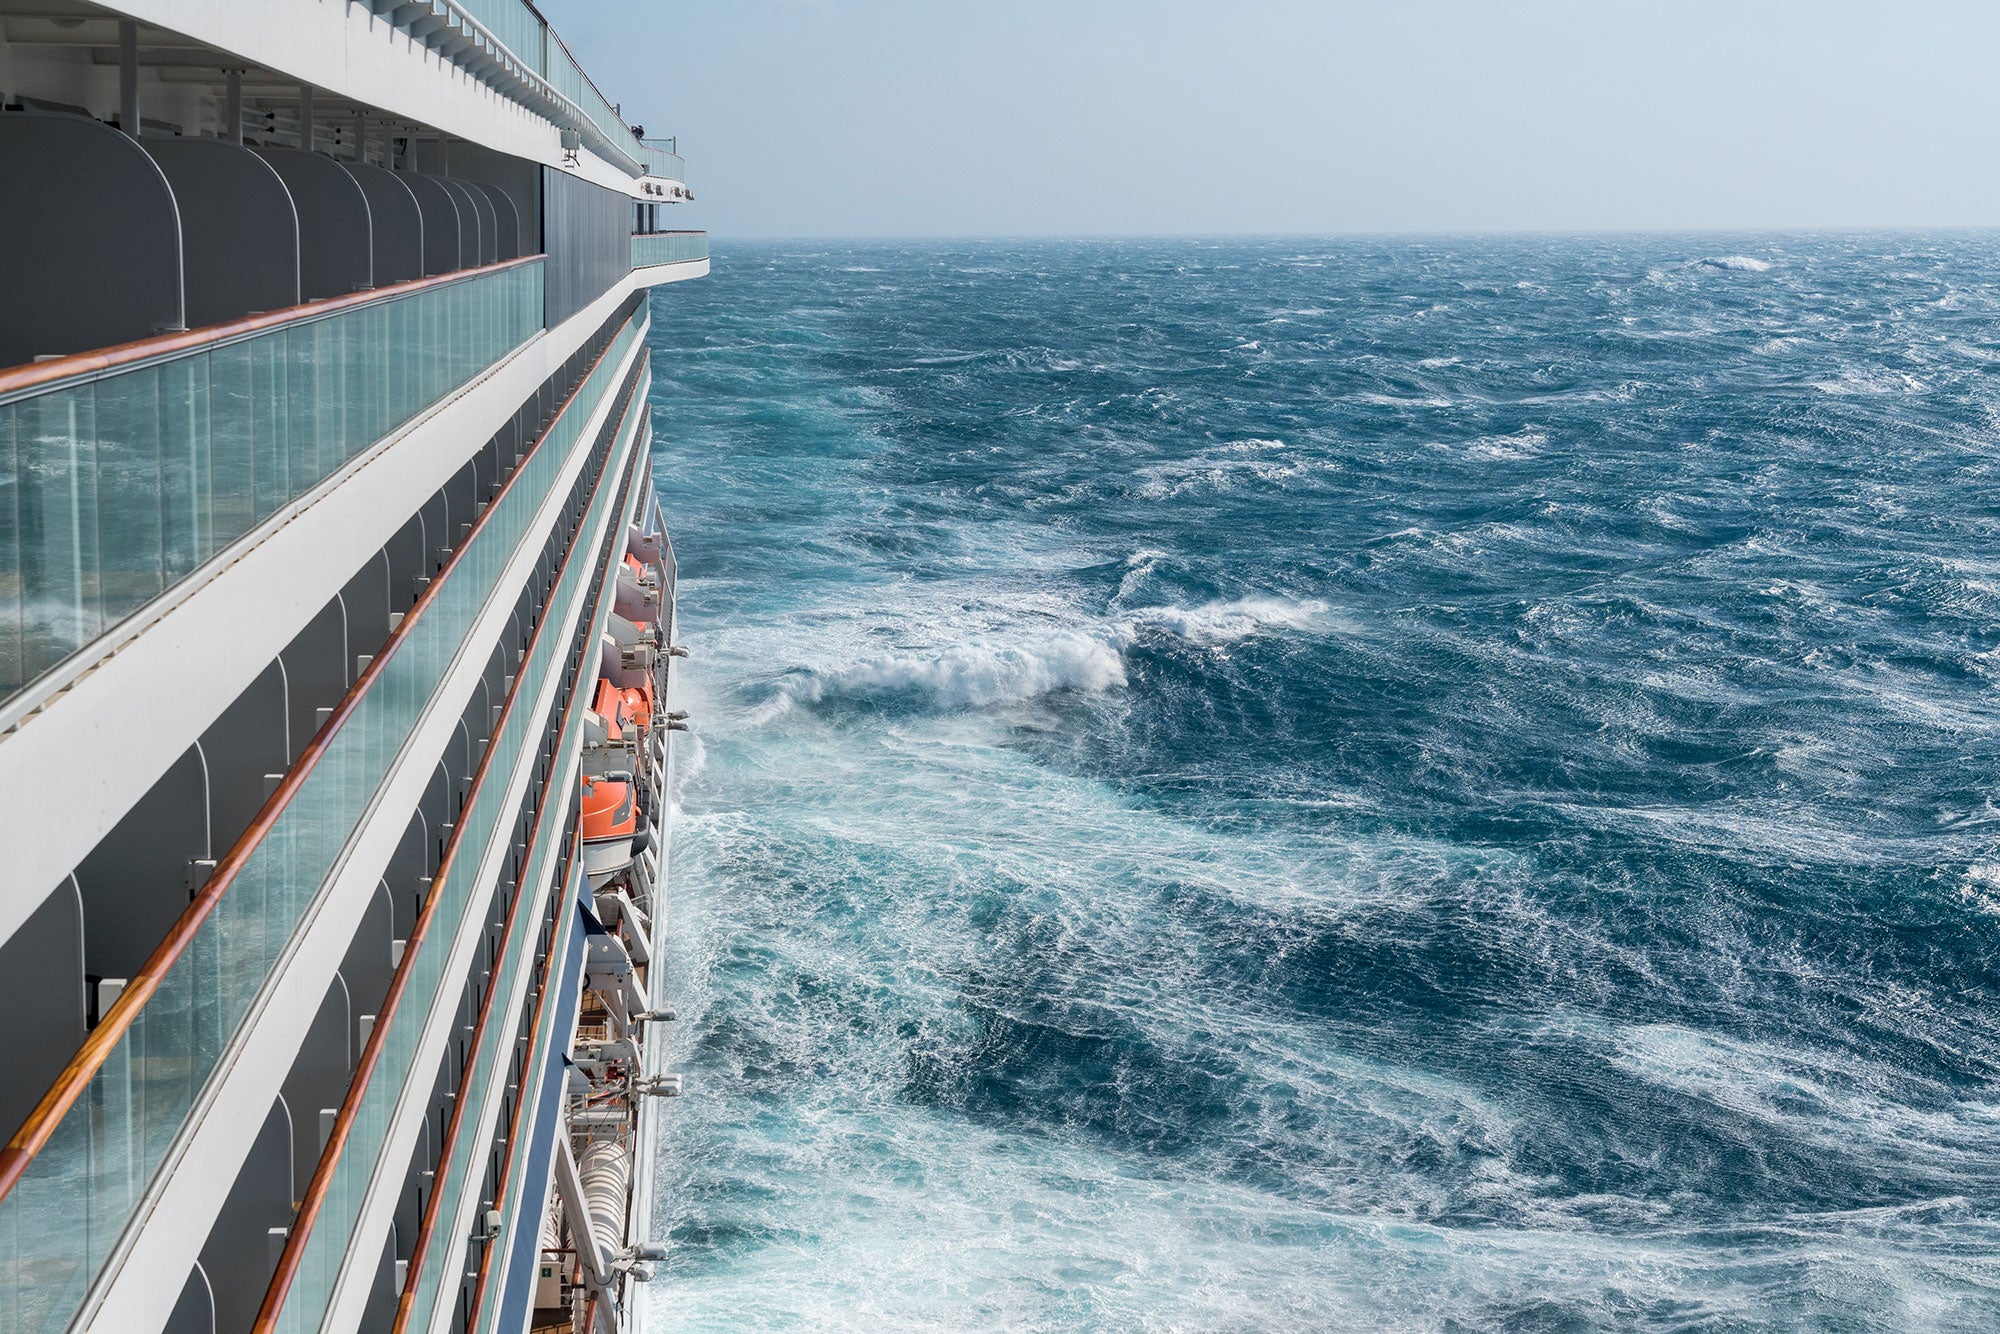 Waves by cruise ship